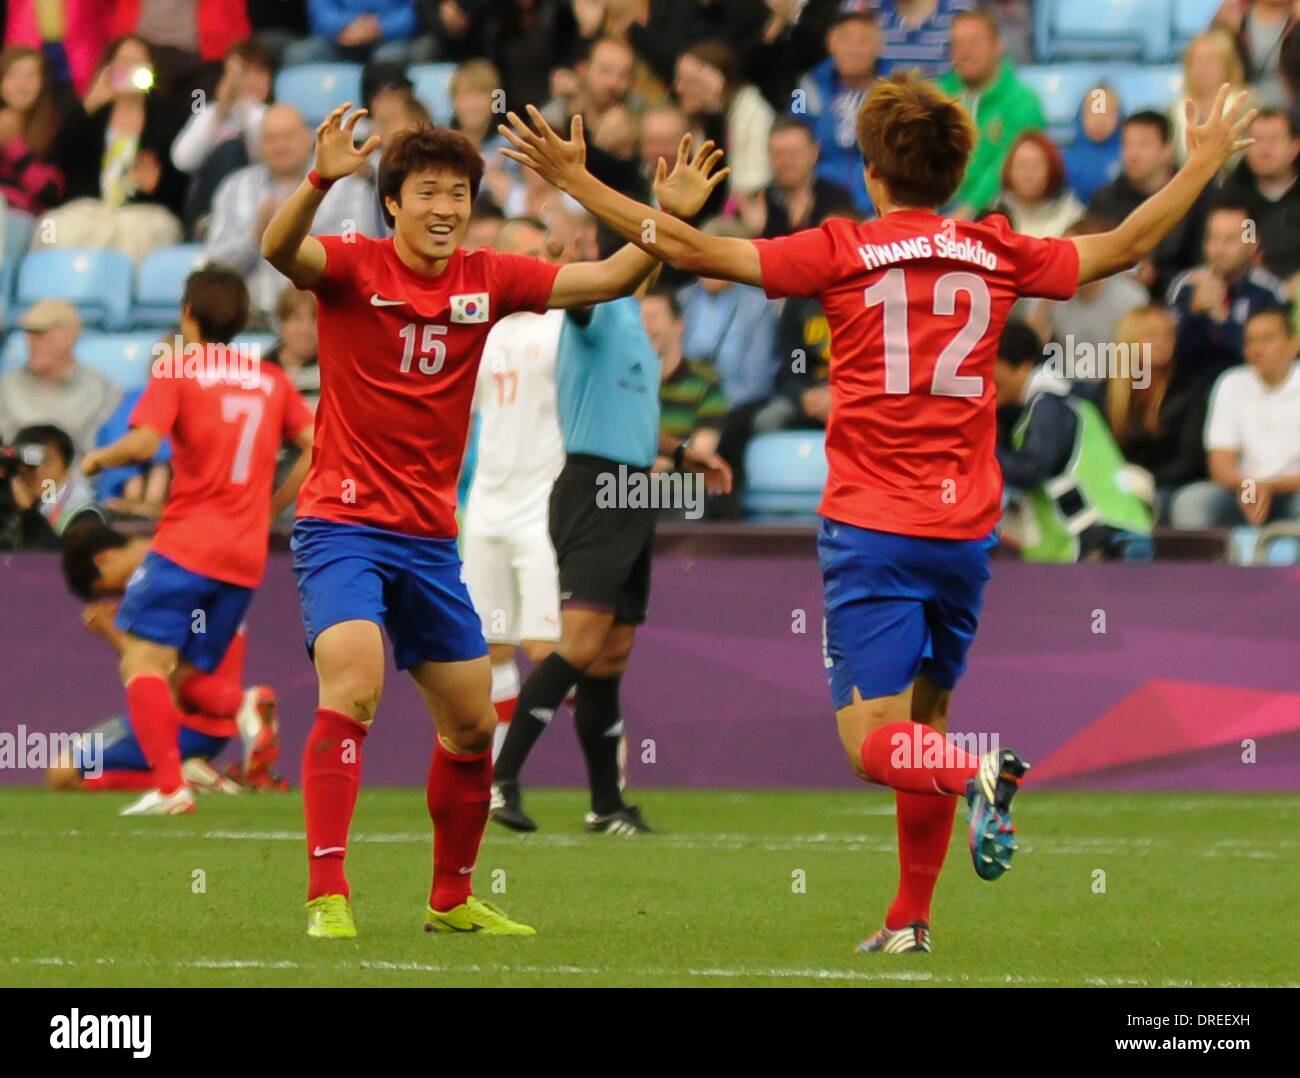 South Korean players celebrate a goal   The Olympic Football Men's Preliminary game between Korea and Switzerland held at the City of Coventry Stadium  Coventry, England - 29.07.12 Stock Photo